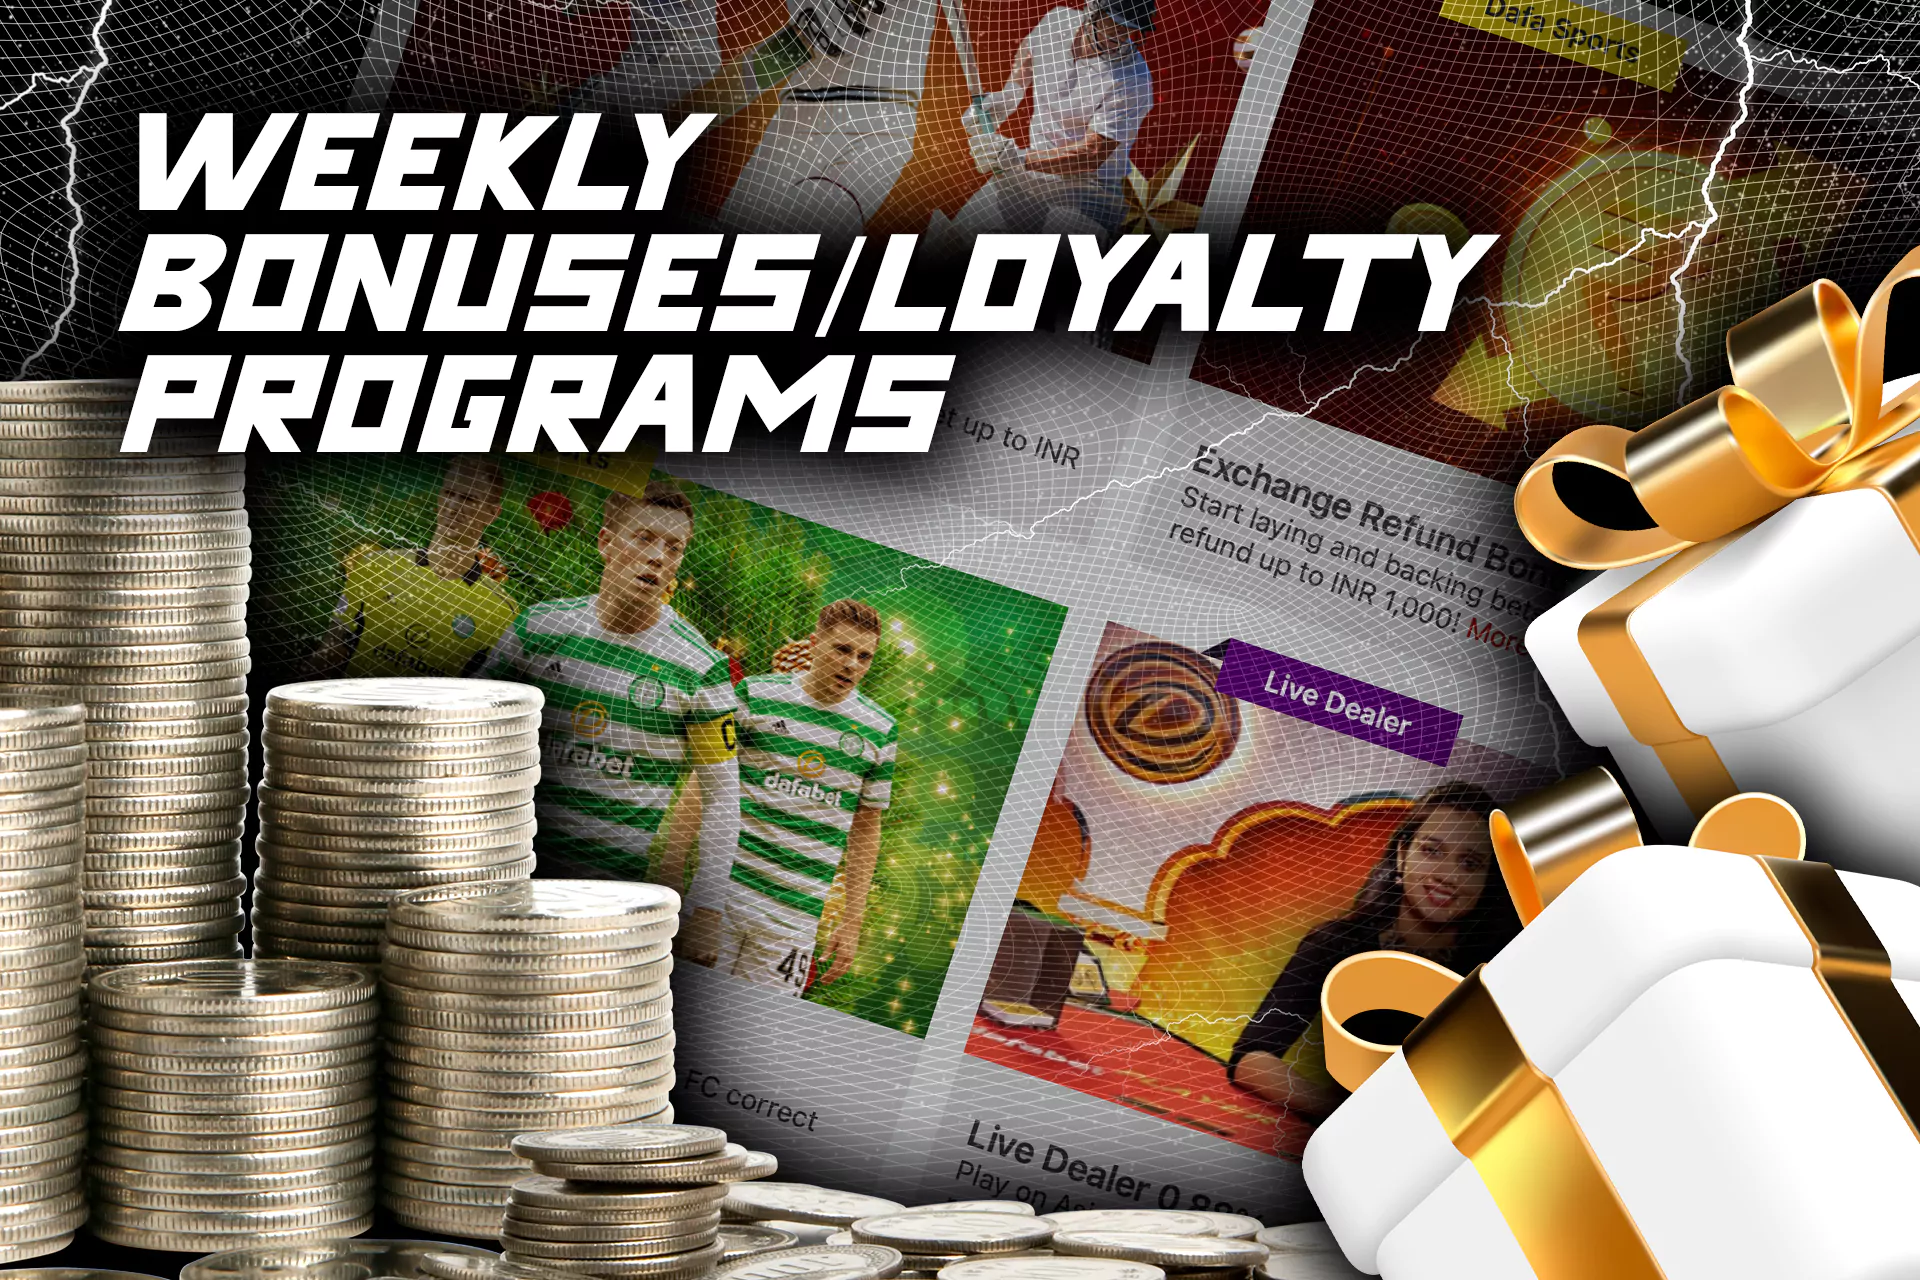 Regural dayly and weekly bonuses.